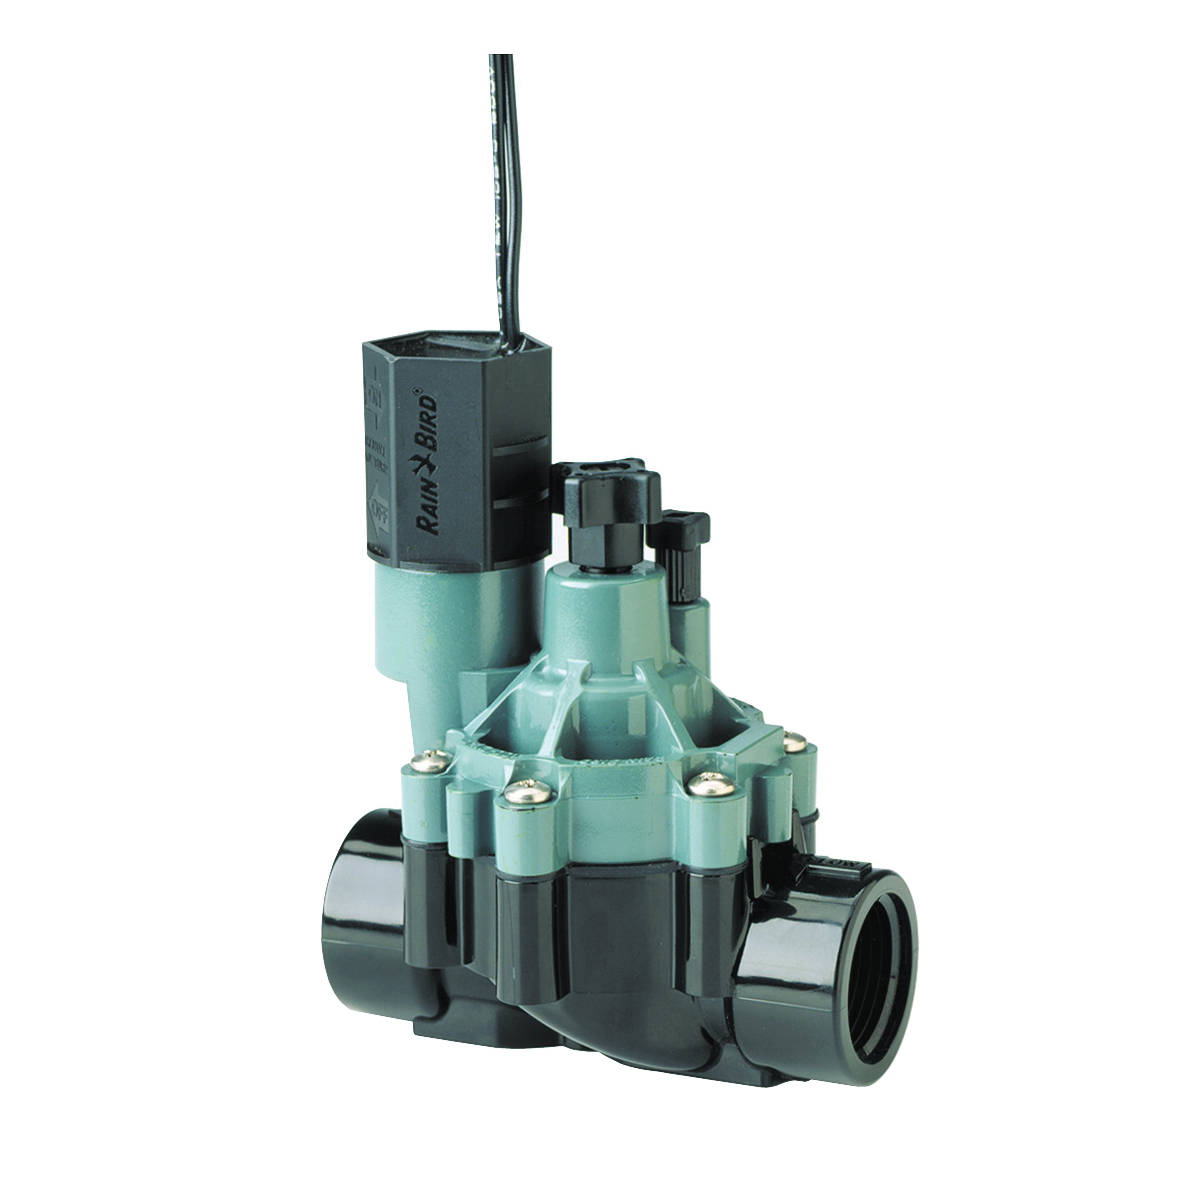 CPF100 Sprinkler Valve with Flow Control, 30 A, 24 V, 1 in, FNPT x FNPT, 0.2 to 22 gpm, Plastic Body